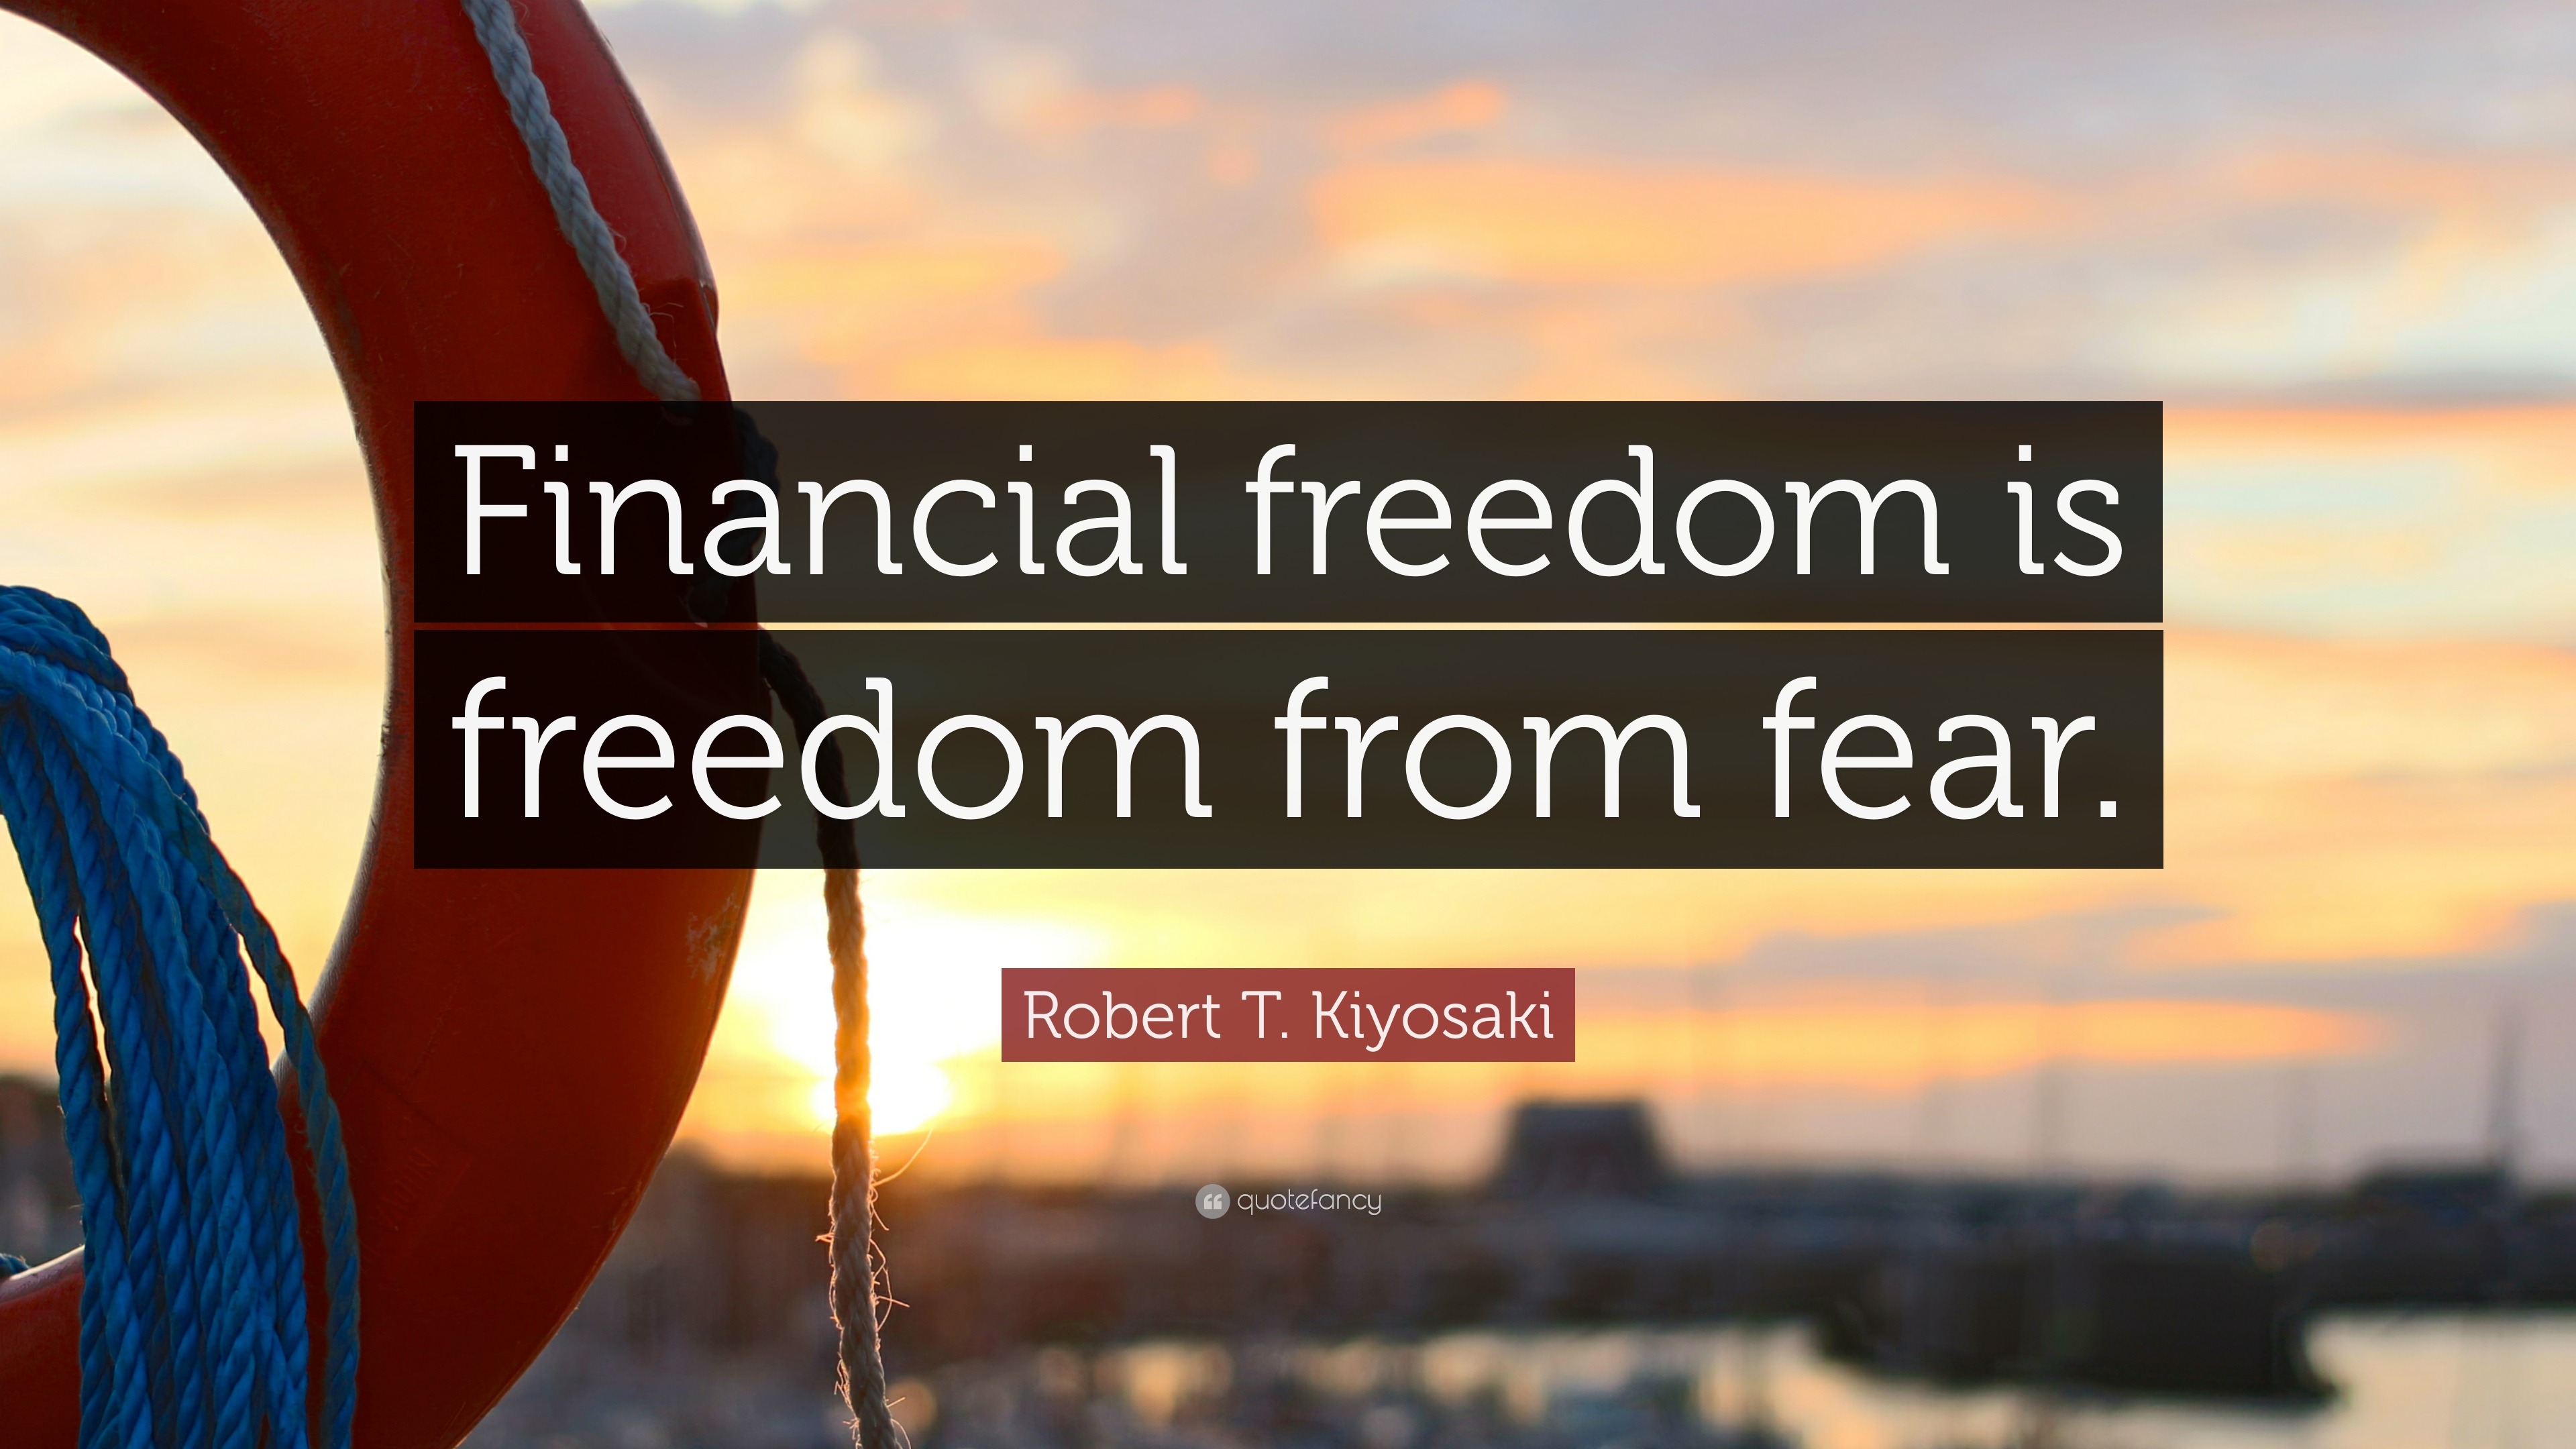 Robert T. Kiyosaki Quote: “Financial freedom is freedom from fear.” (19 wallpapers) - Quotefancy